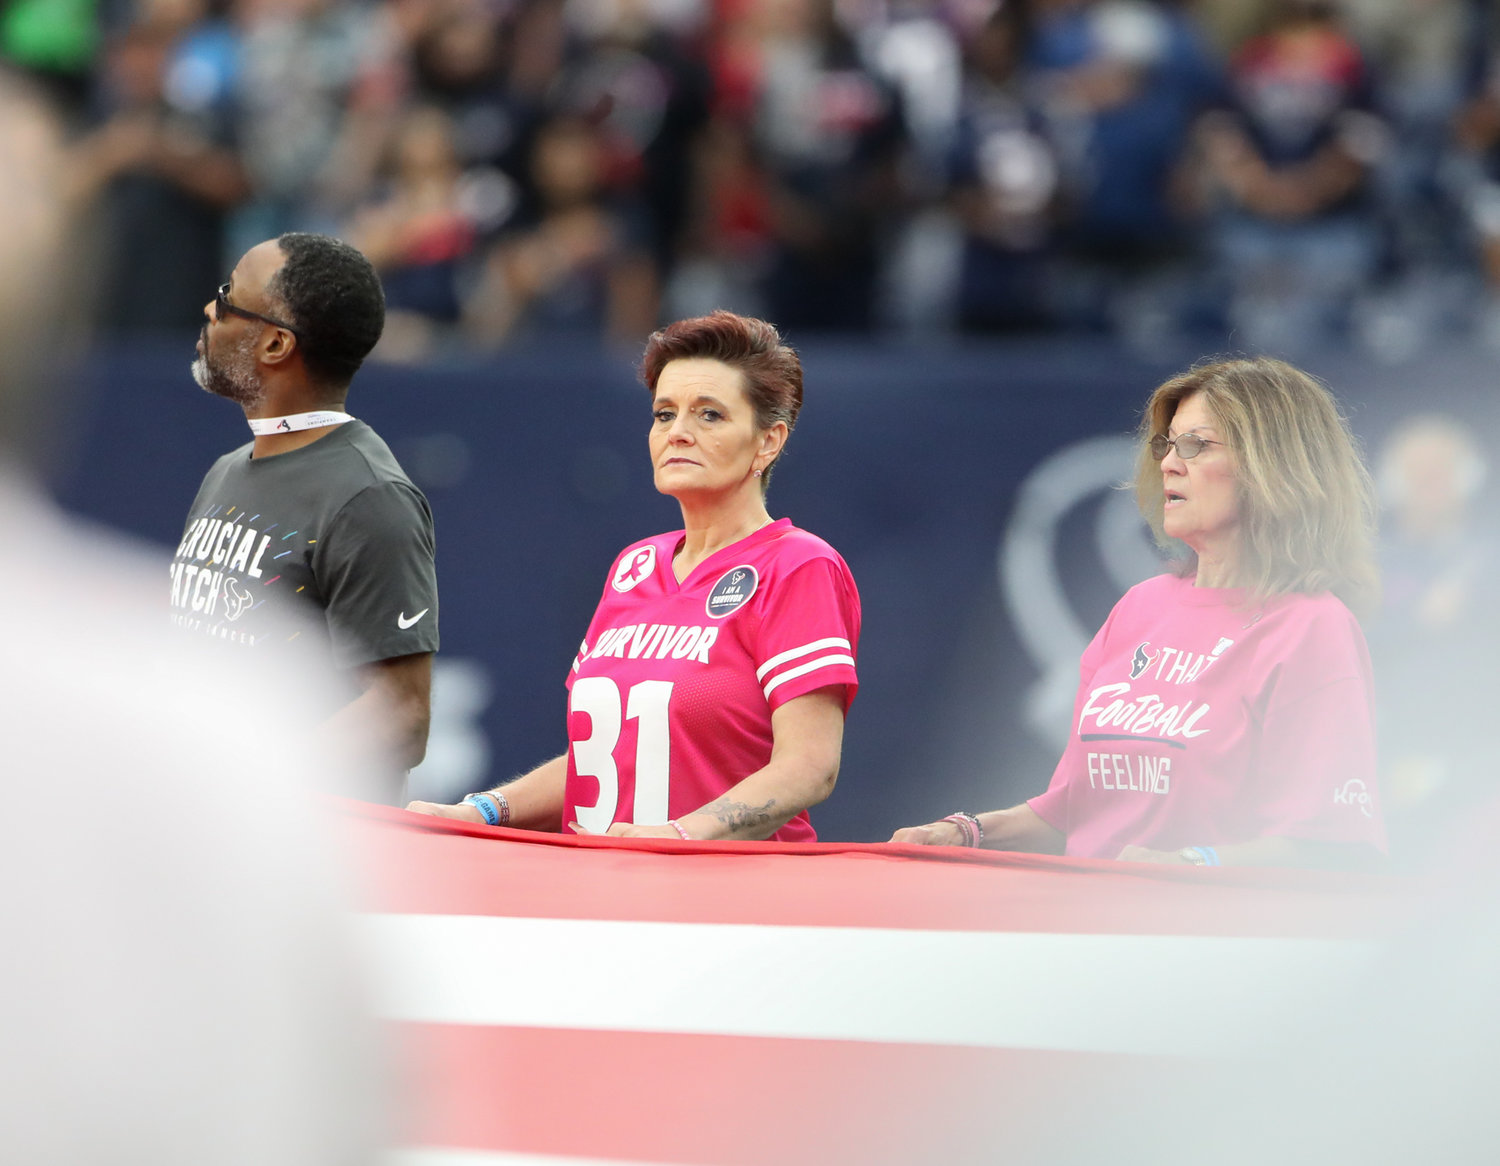 Cancer survivors hold the flag during the national anthem before the start of an NFL game between Houston and New England on “Pink Ribbon Day” October 10, 2021 in Houston, Texas. The Patriots won 25-22.